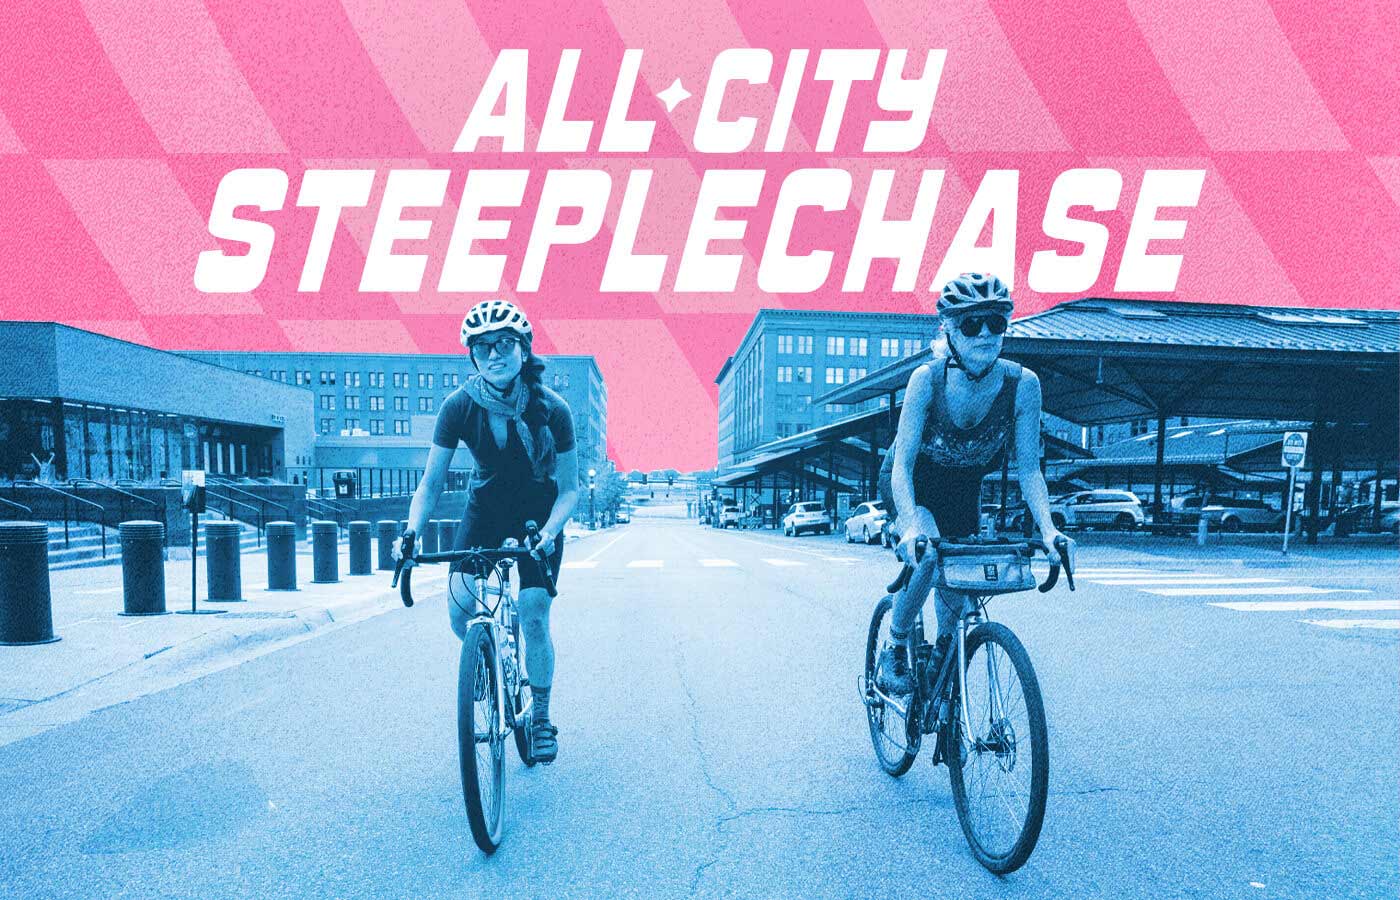 All-City Steeplechase